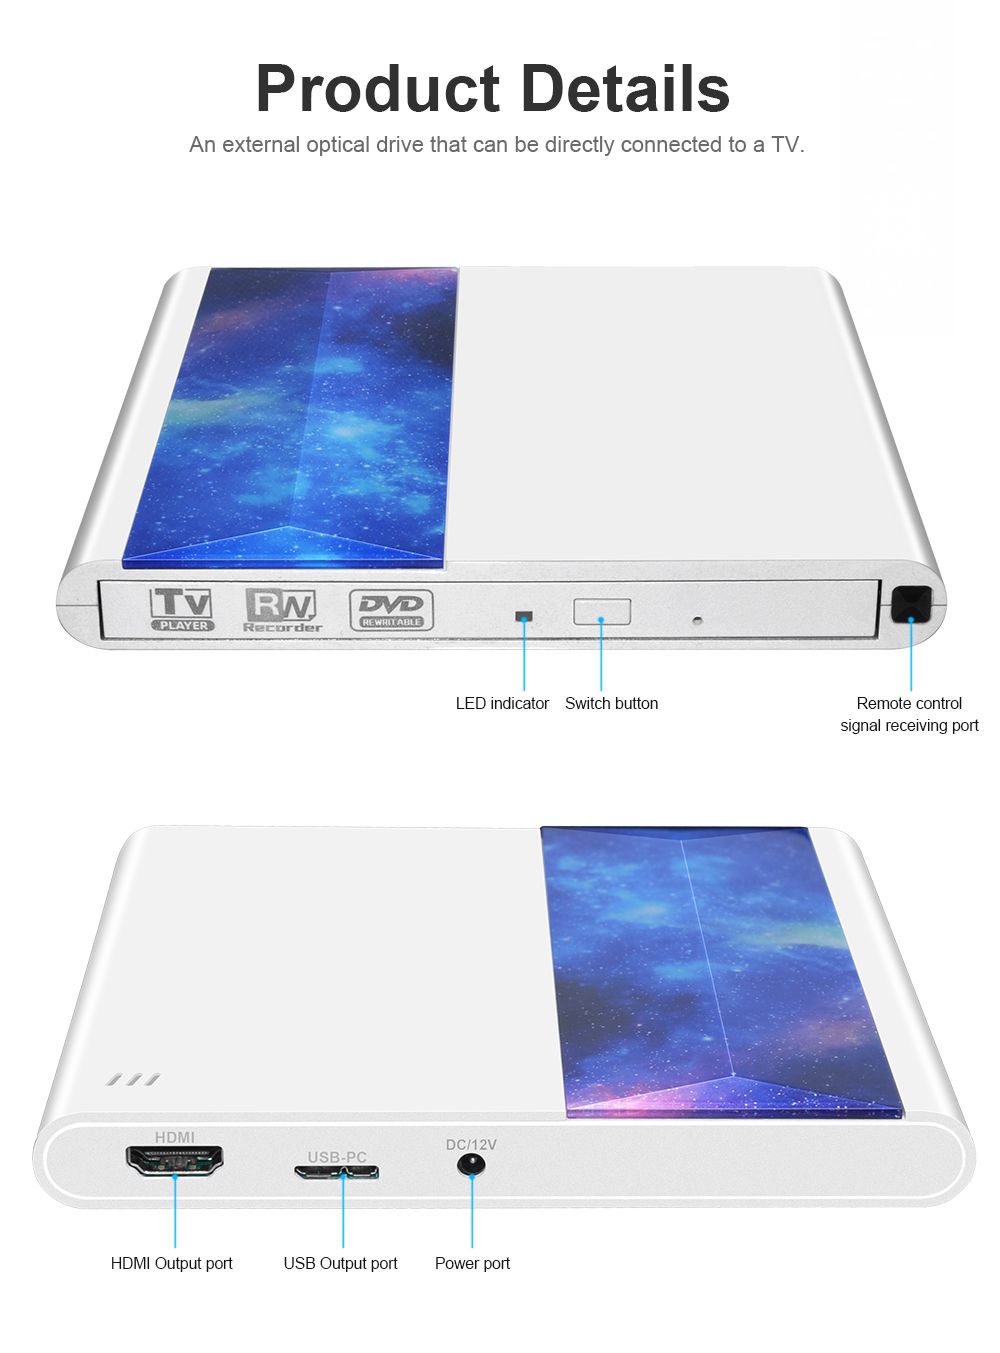 Deepfox-External-DVD-Optical-Drives-Support-Connecting-TV-with-USB-30-and-Type-C-Interface-Remote-Co-1711391